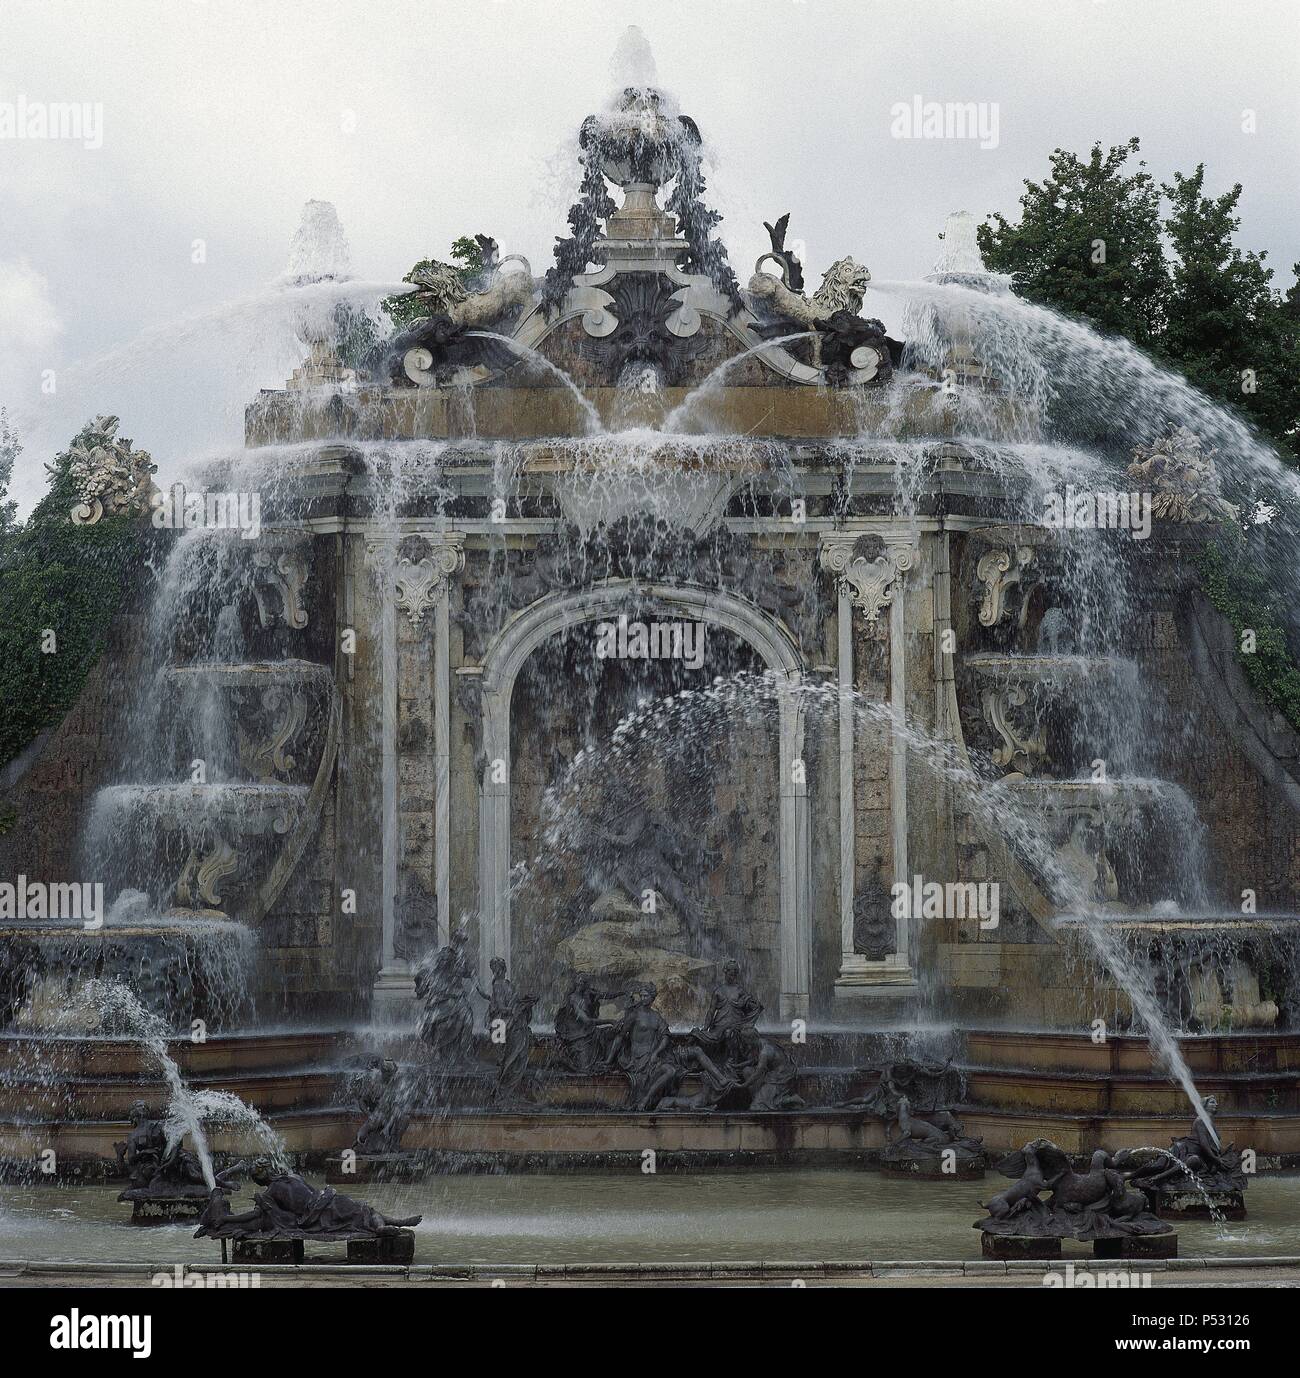 Spain. Castile and Leon. San Ildefonso. Royal Palace of La Granja de San Ildefons. The Gardens. Fountain Baths of Diane. Built by Demaudre and Pitue. Baroque style. View. Stock Photo